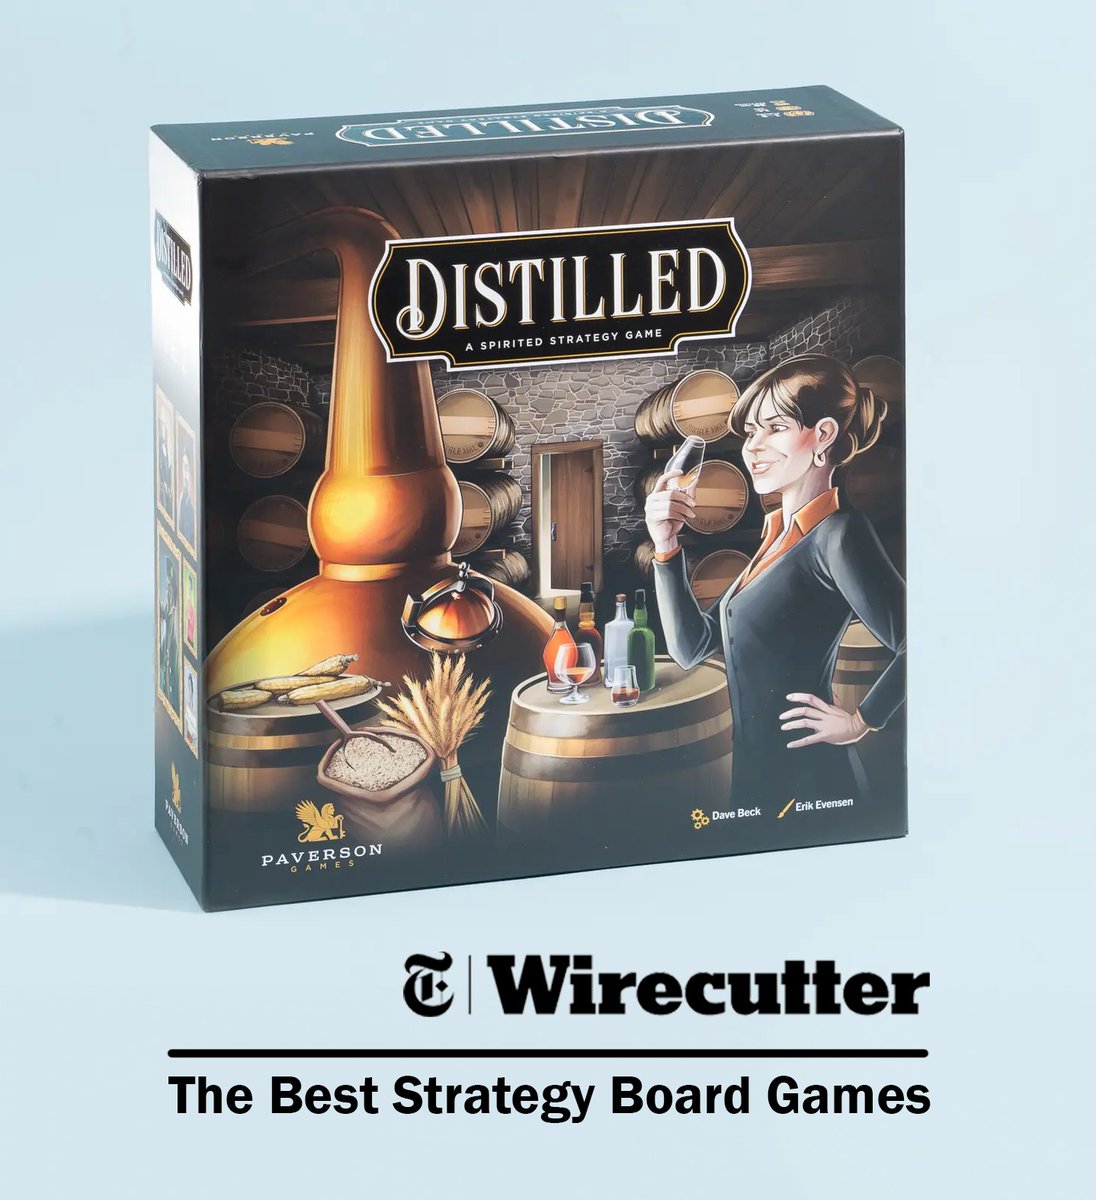 Distilled selected as one of the Best Strategy Board Games by the @nytimes @wirecutter! 📰 nytimes.com/wirecutter/rev… 🥳 #nyt #newyorktimes #distilled #distilledgame #paversongames #scotch #whiskey #whisky #bourbon #distillery #boardgaming #boardgames #boardgamegeek